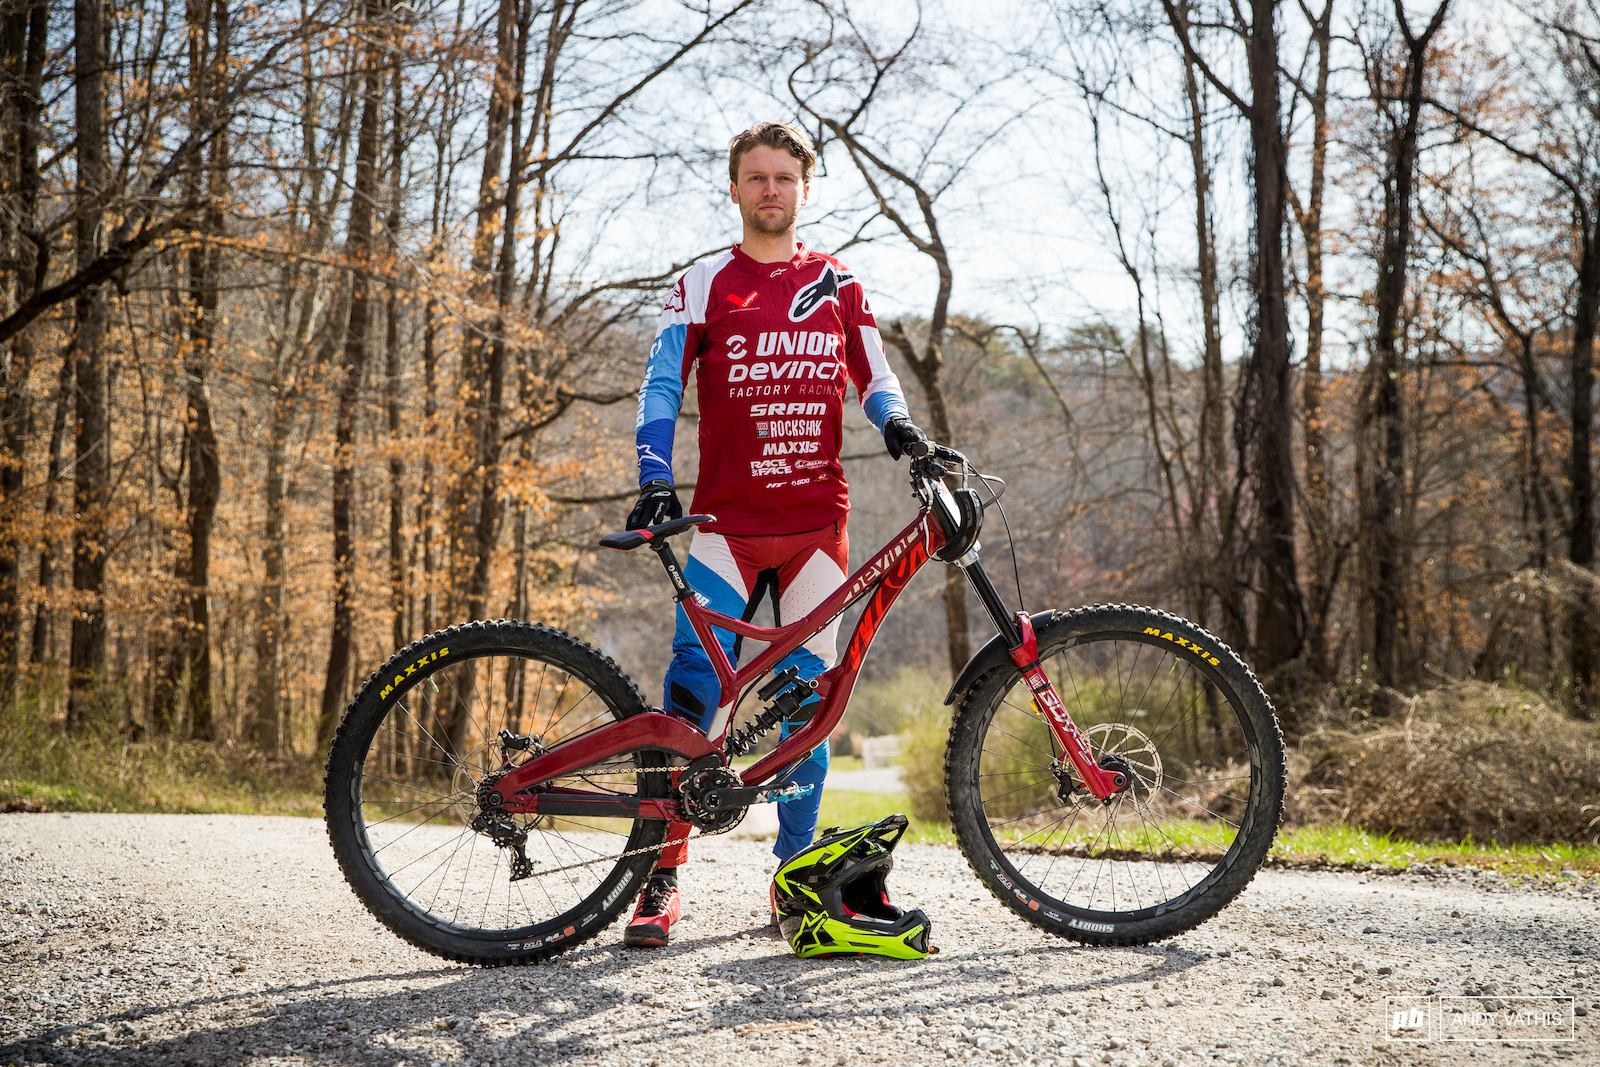 Kirk Mcdowall is officially on Unior Devinci's factory team. The Canadian is excited to get the ball rolling with full support after proving himself on his own terms.